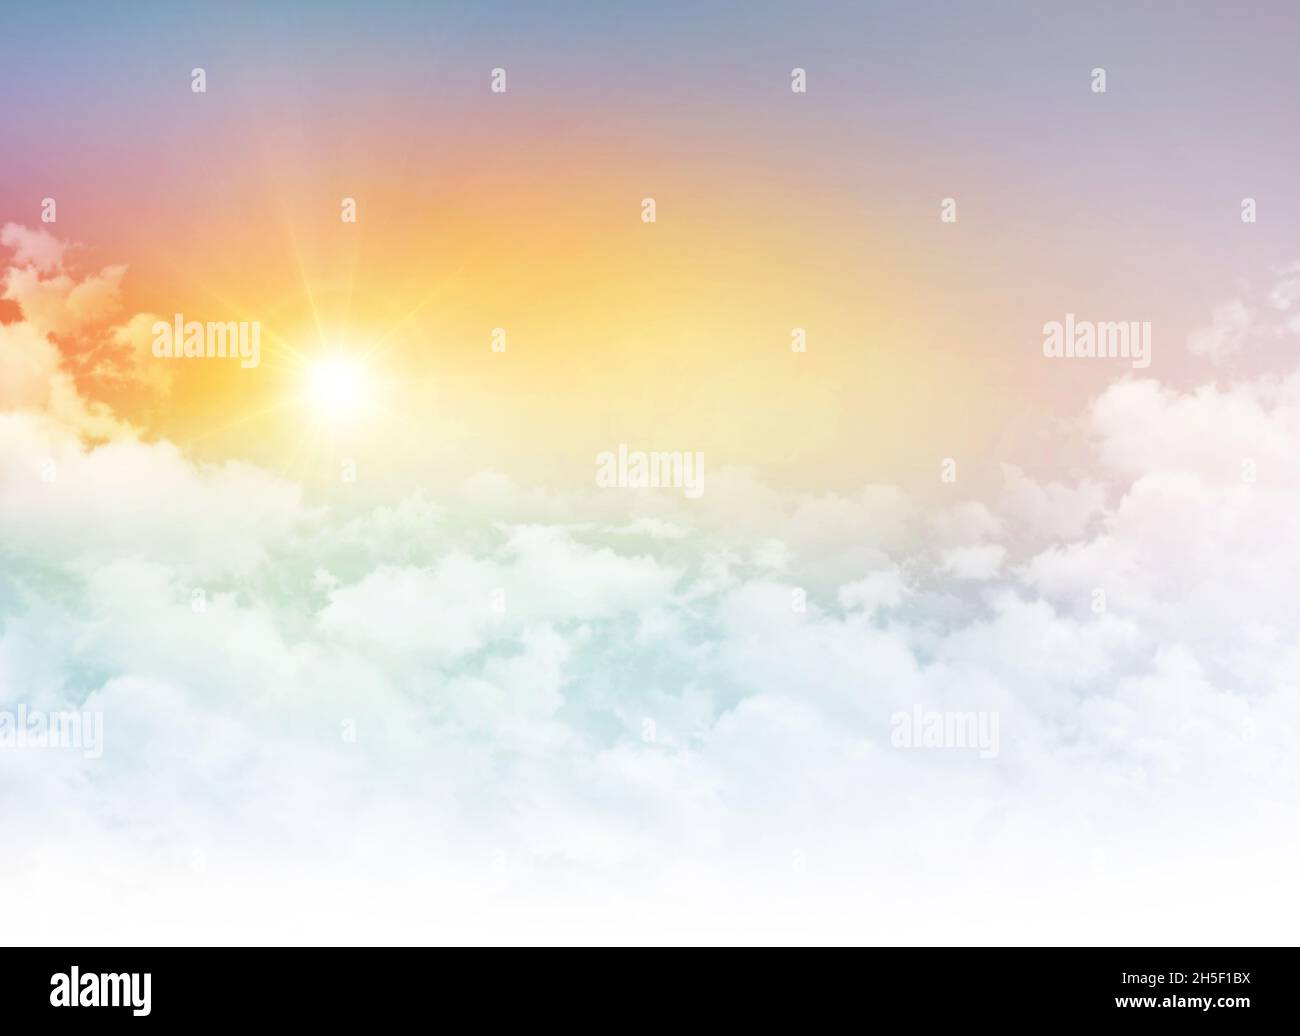 Sunrise in the morning colorful sky with white low clouds, on a clear new day in Heaven Stock Photo